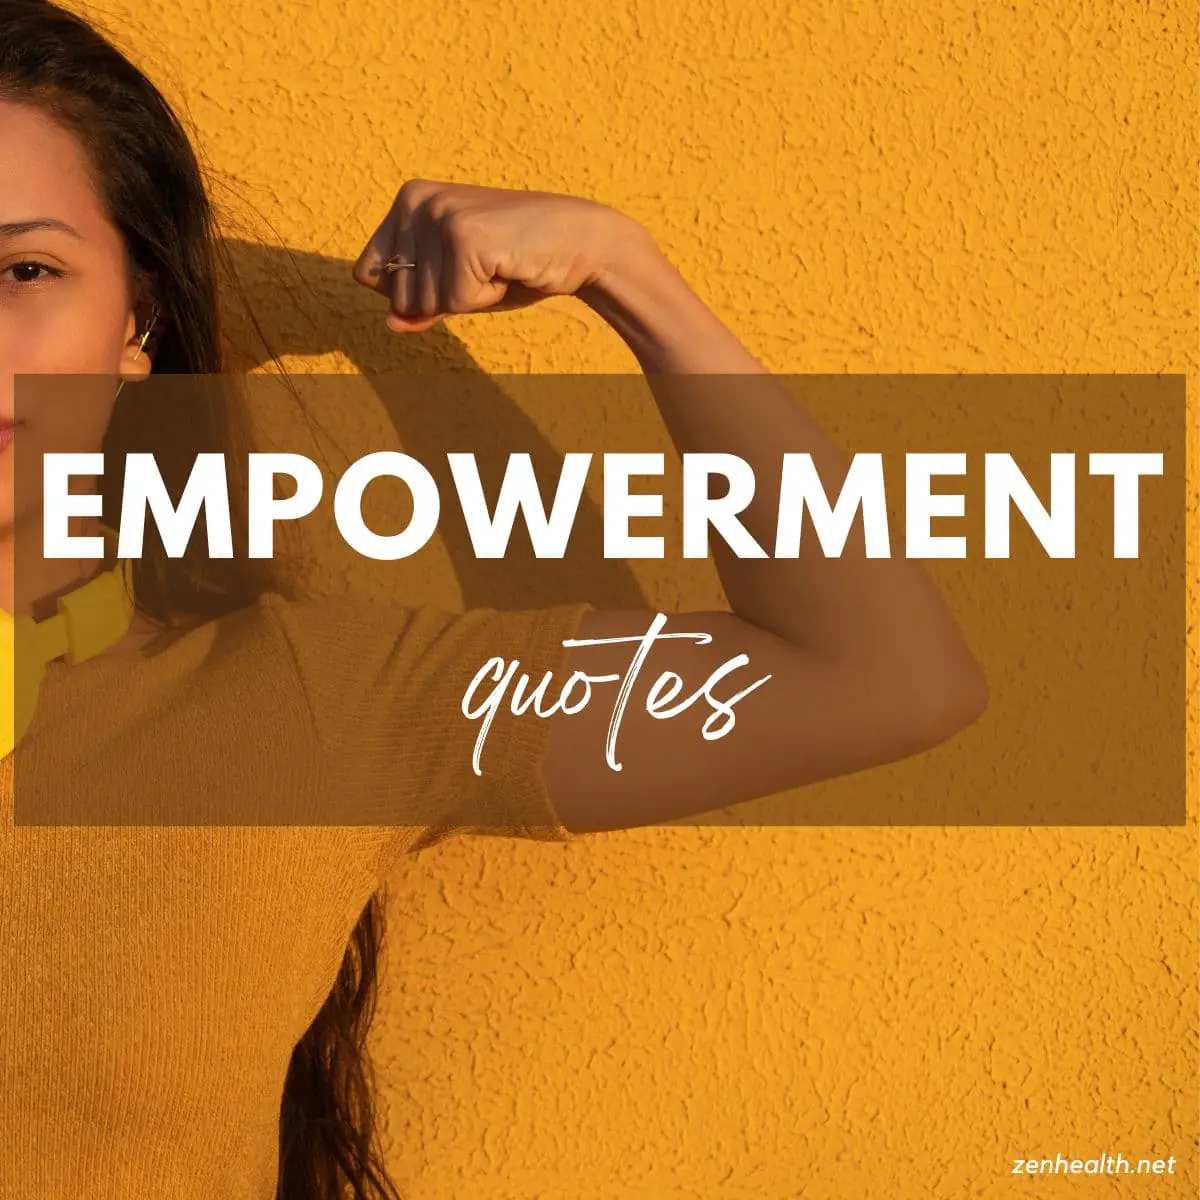 34 More Empowerment Quotes to Motivate You